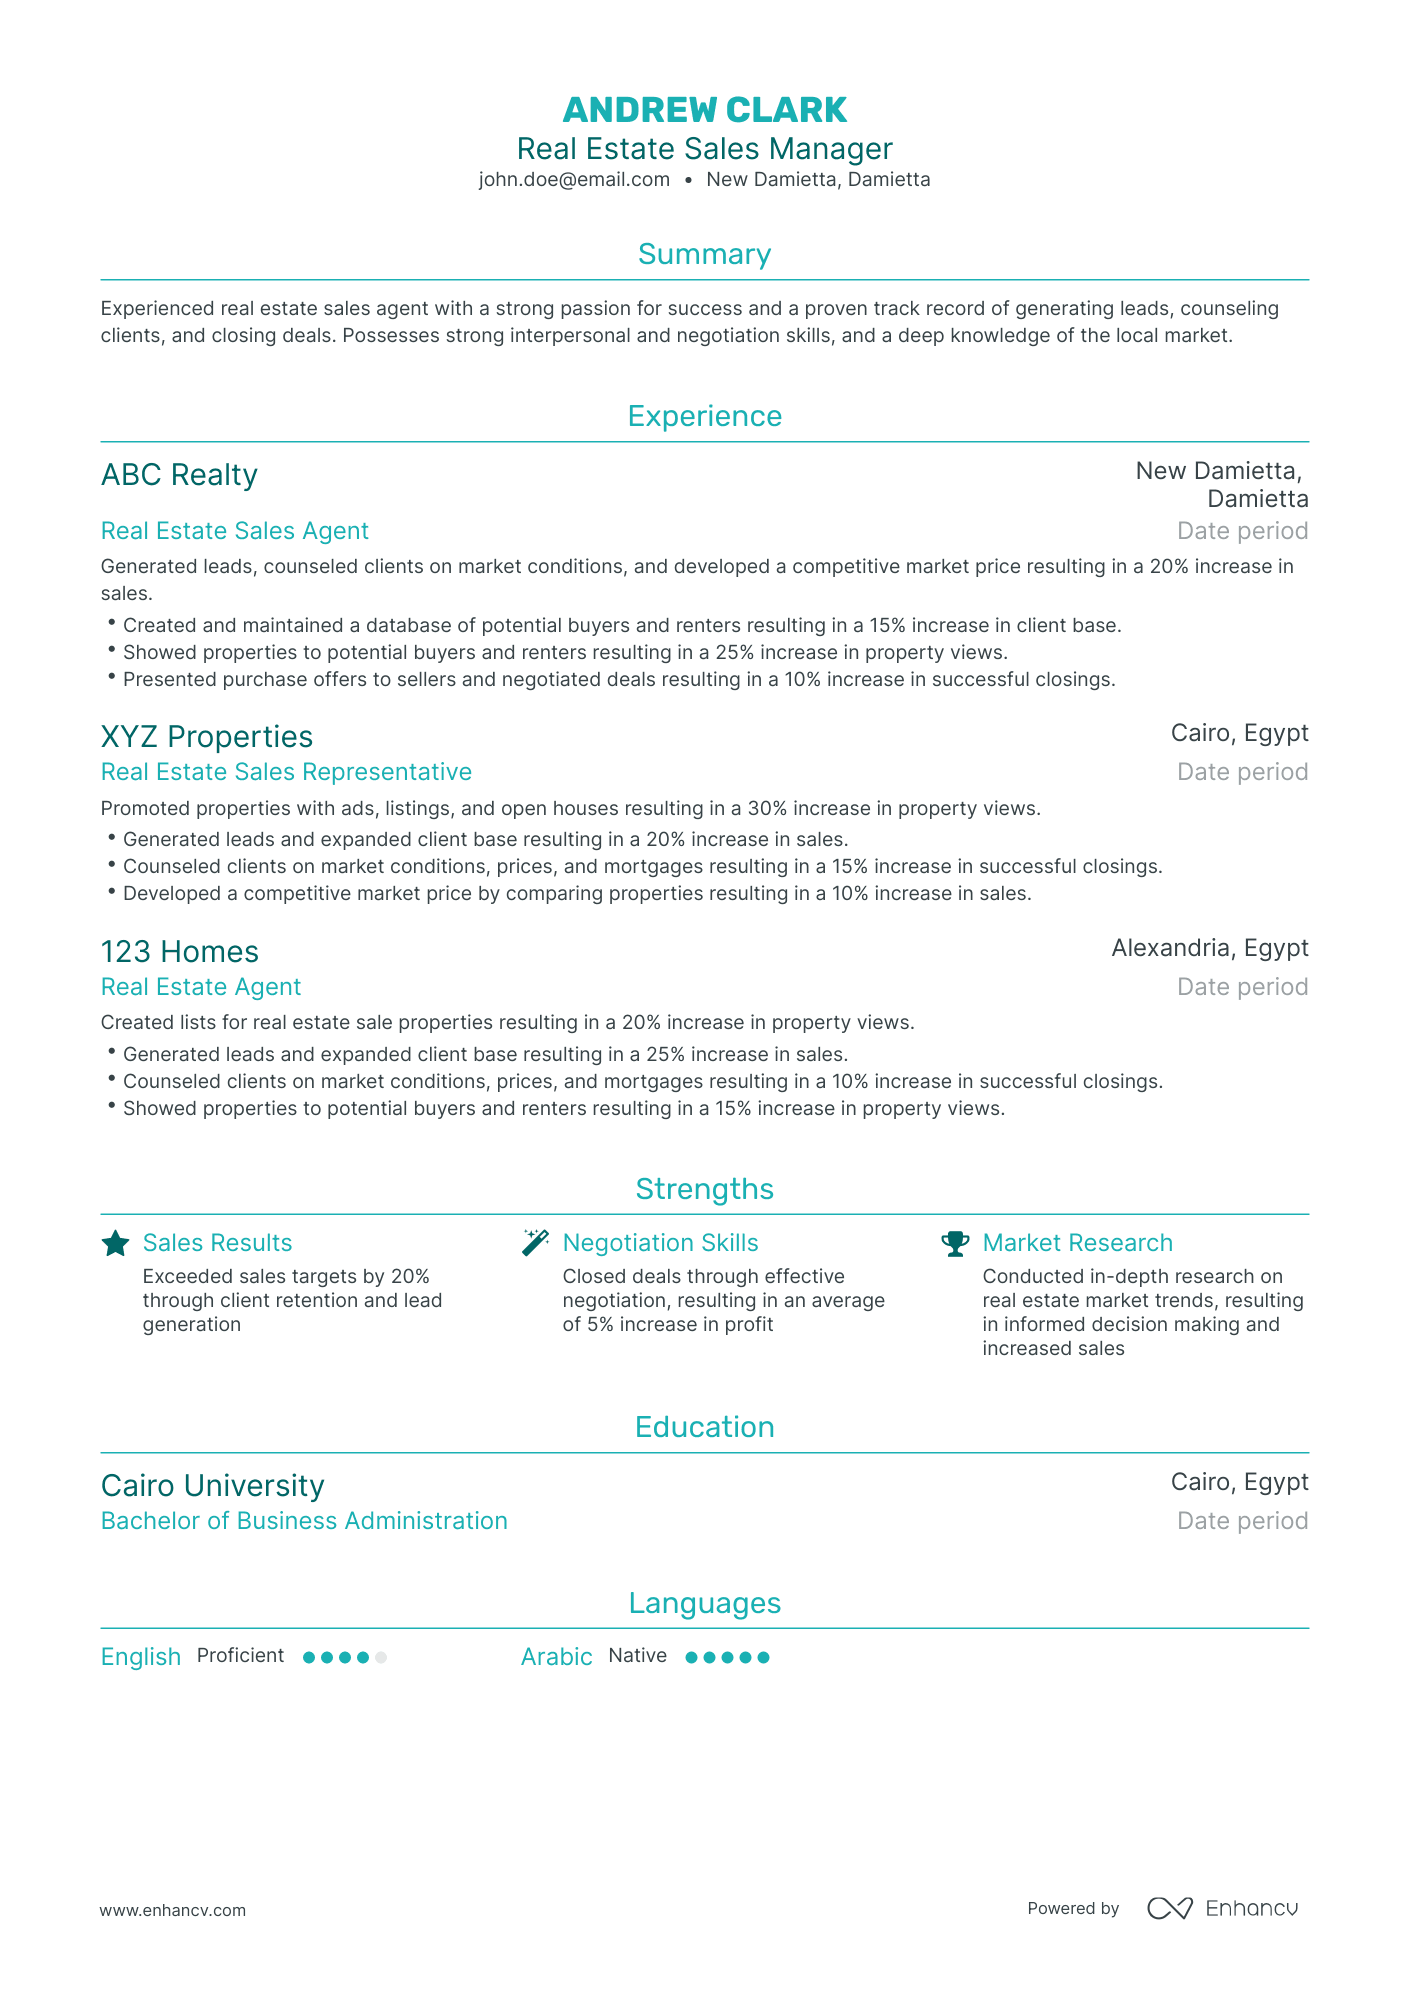 Traditional Real Estate Sales Manager Resume Template